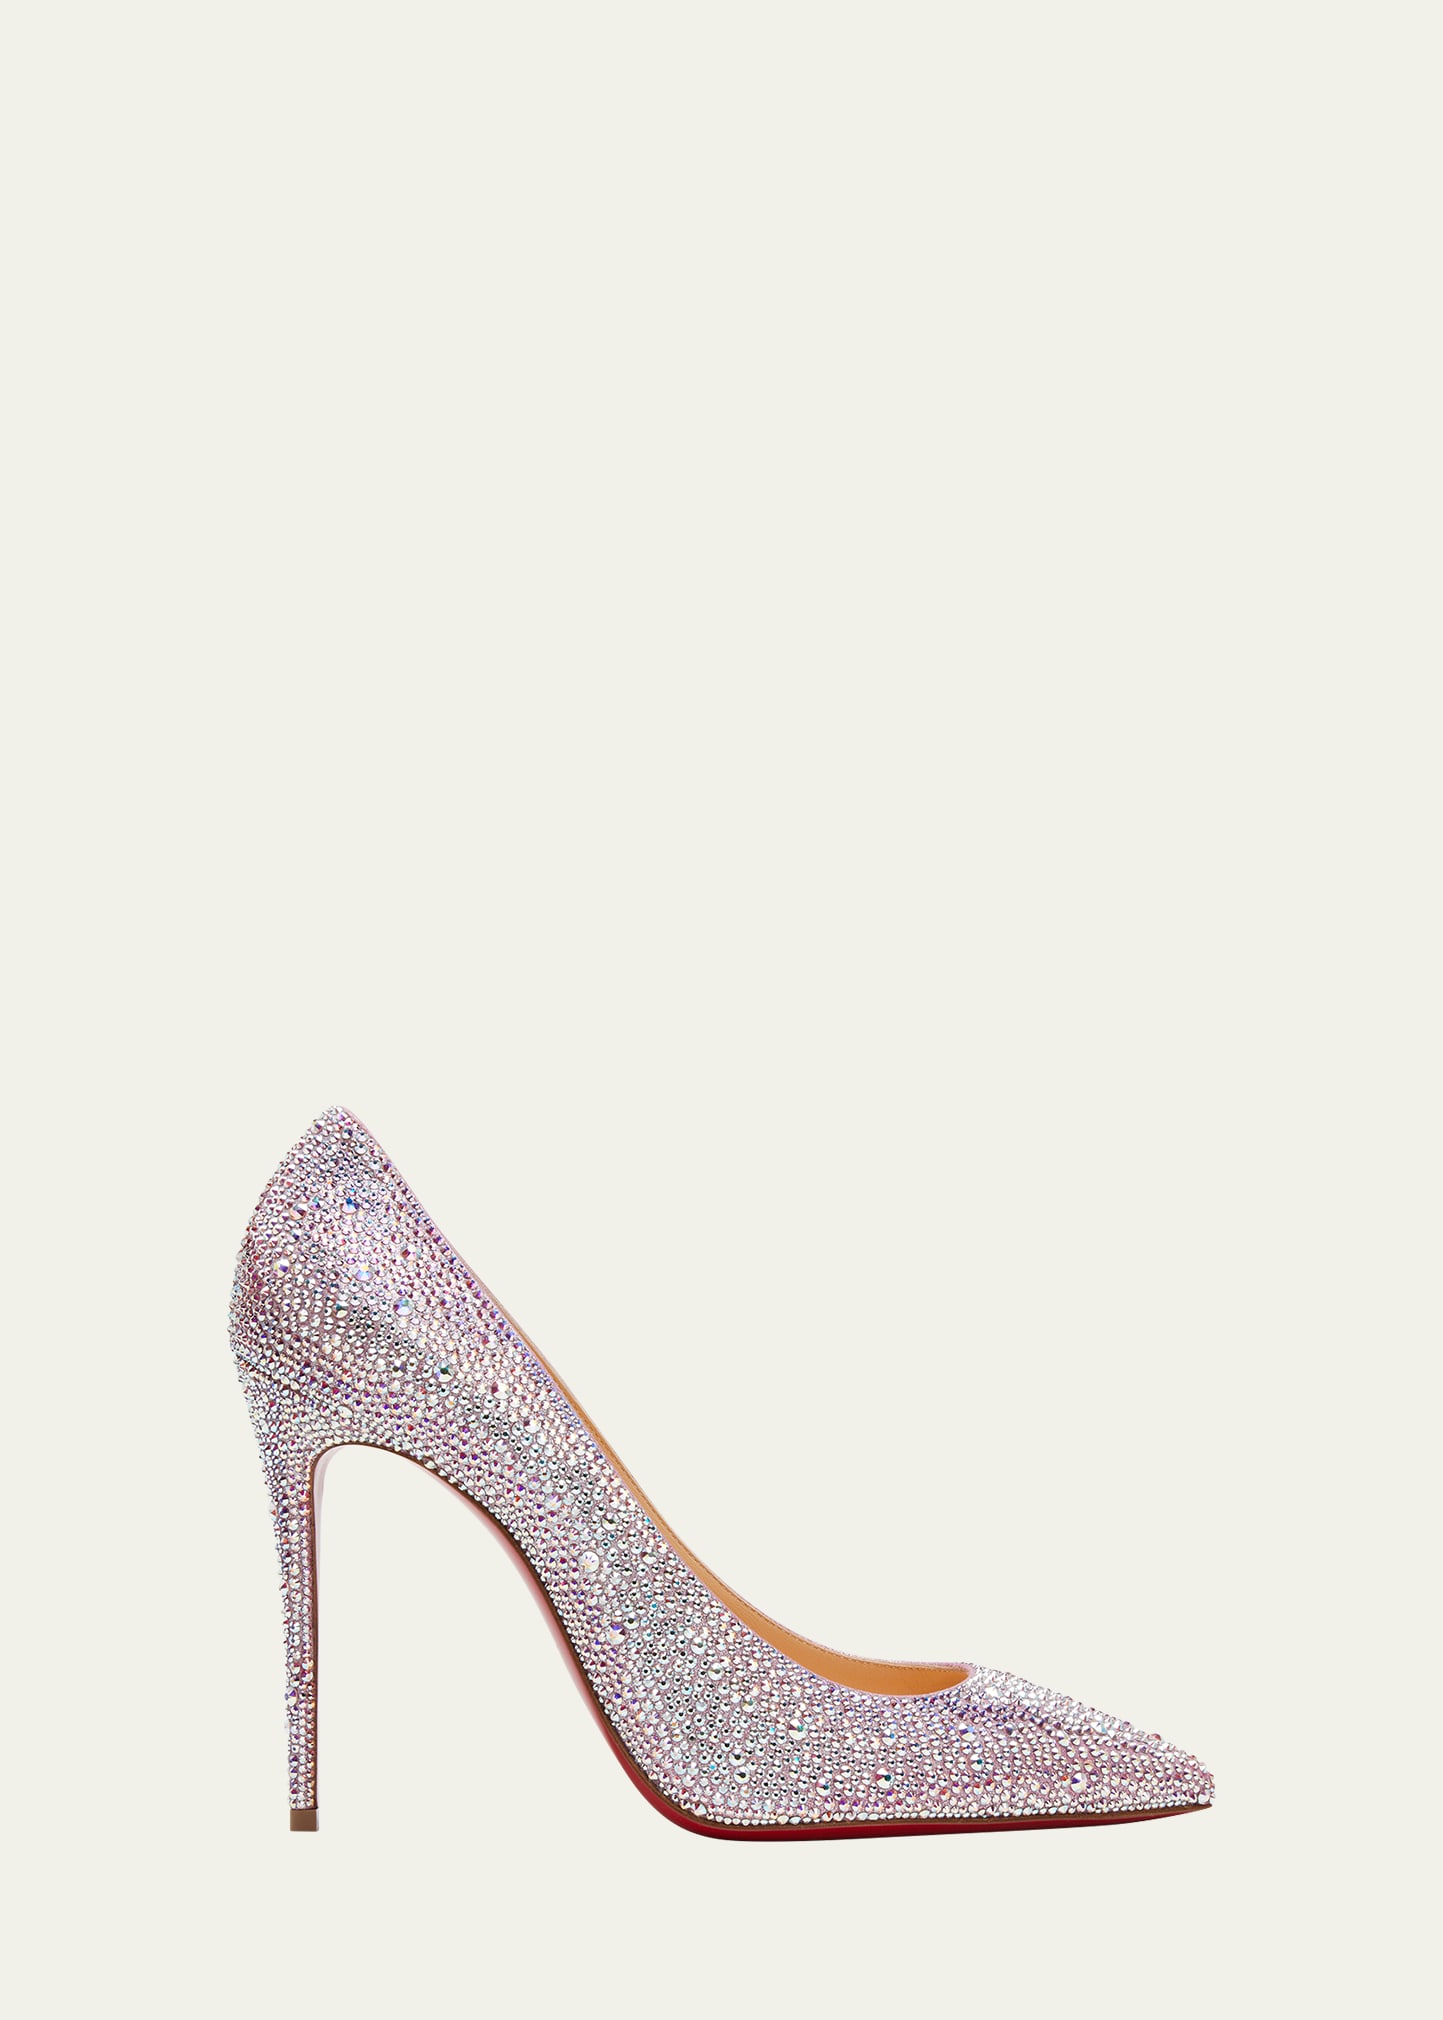 Christian Louboutin Kate Strass Red Sole Pumps In Silver | ModeSens